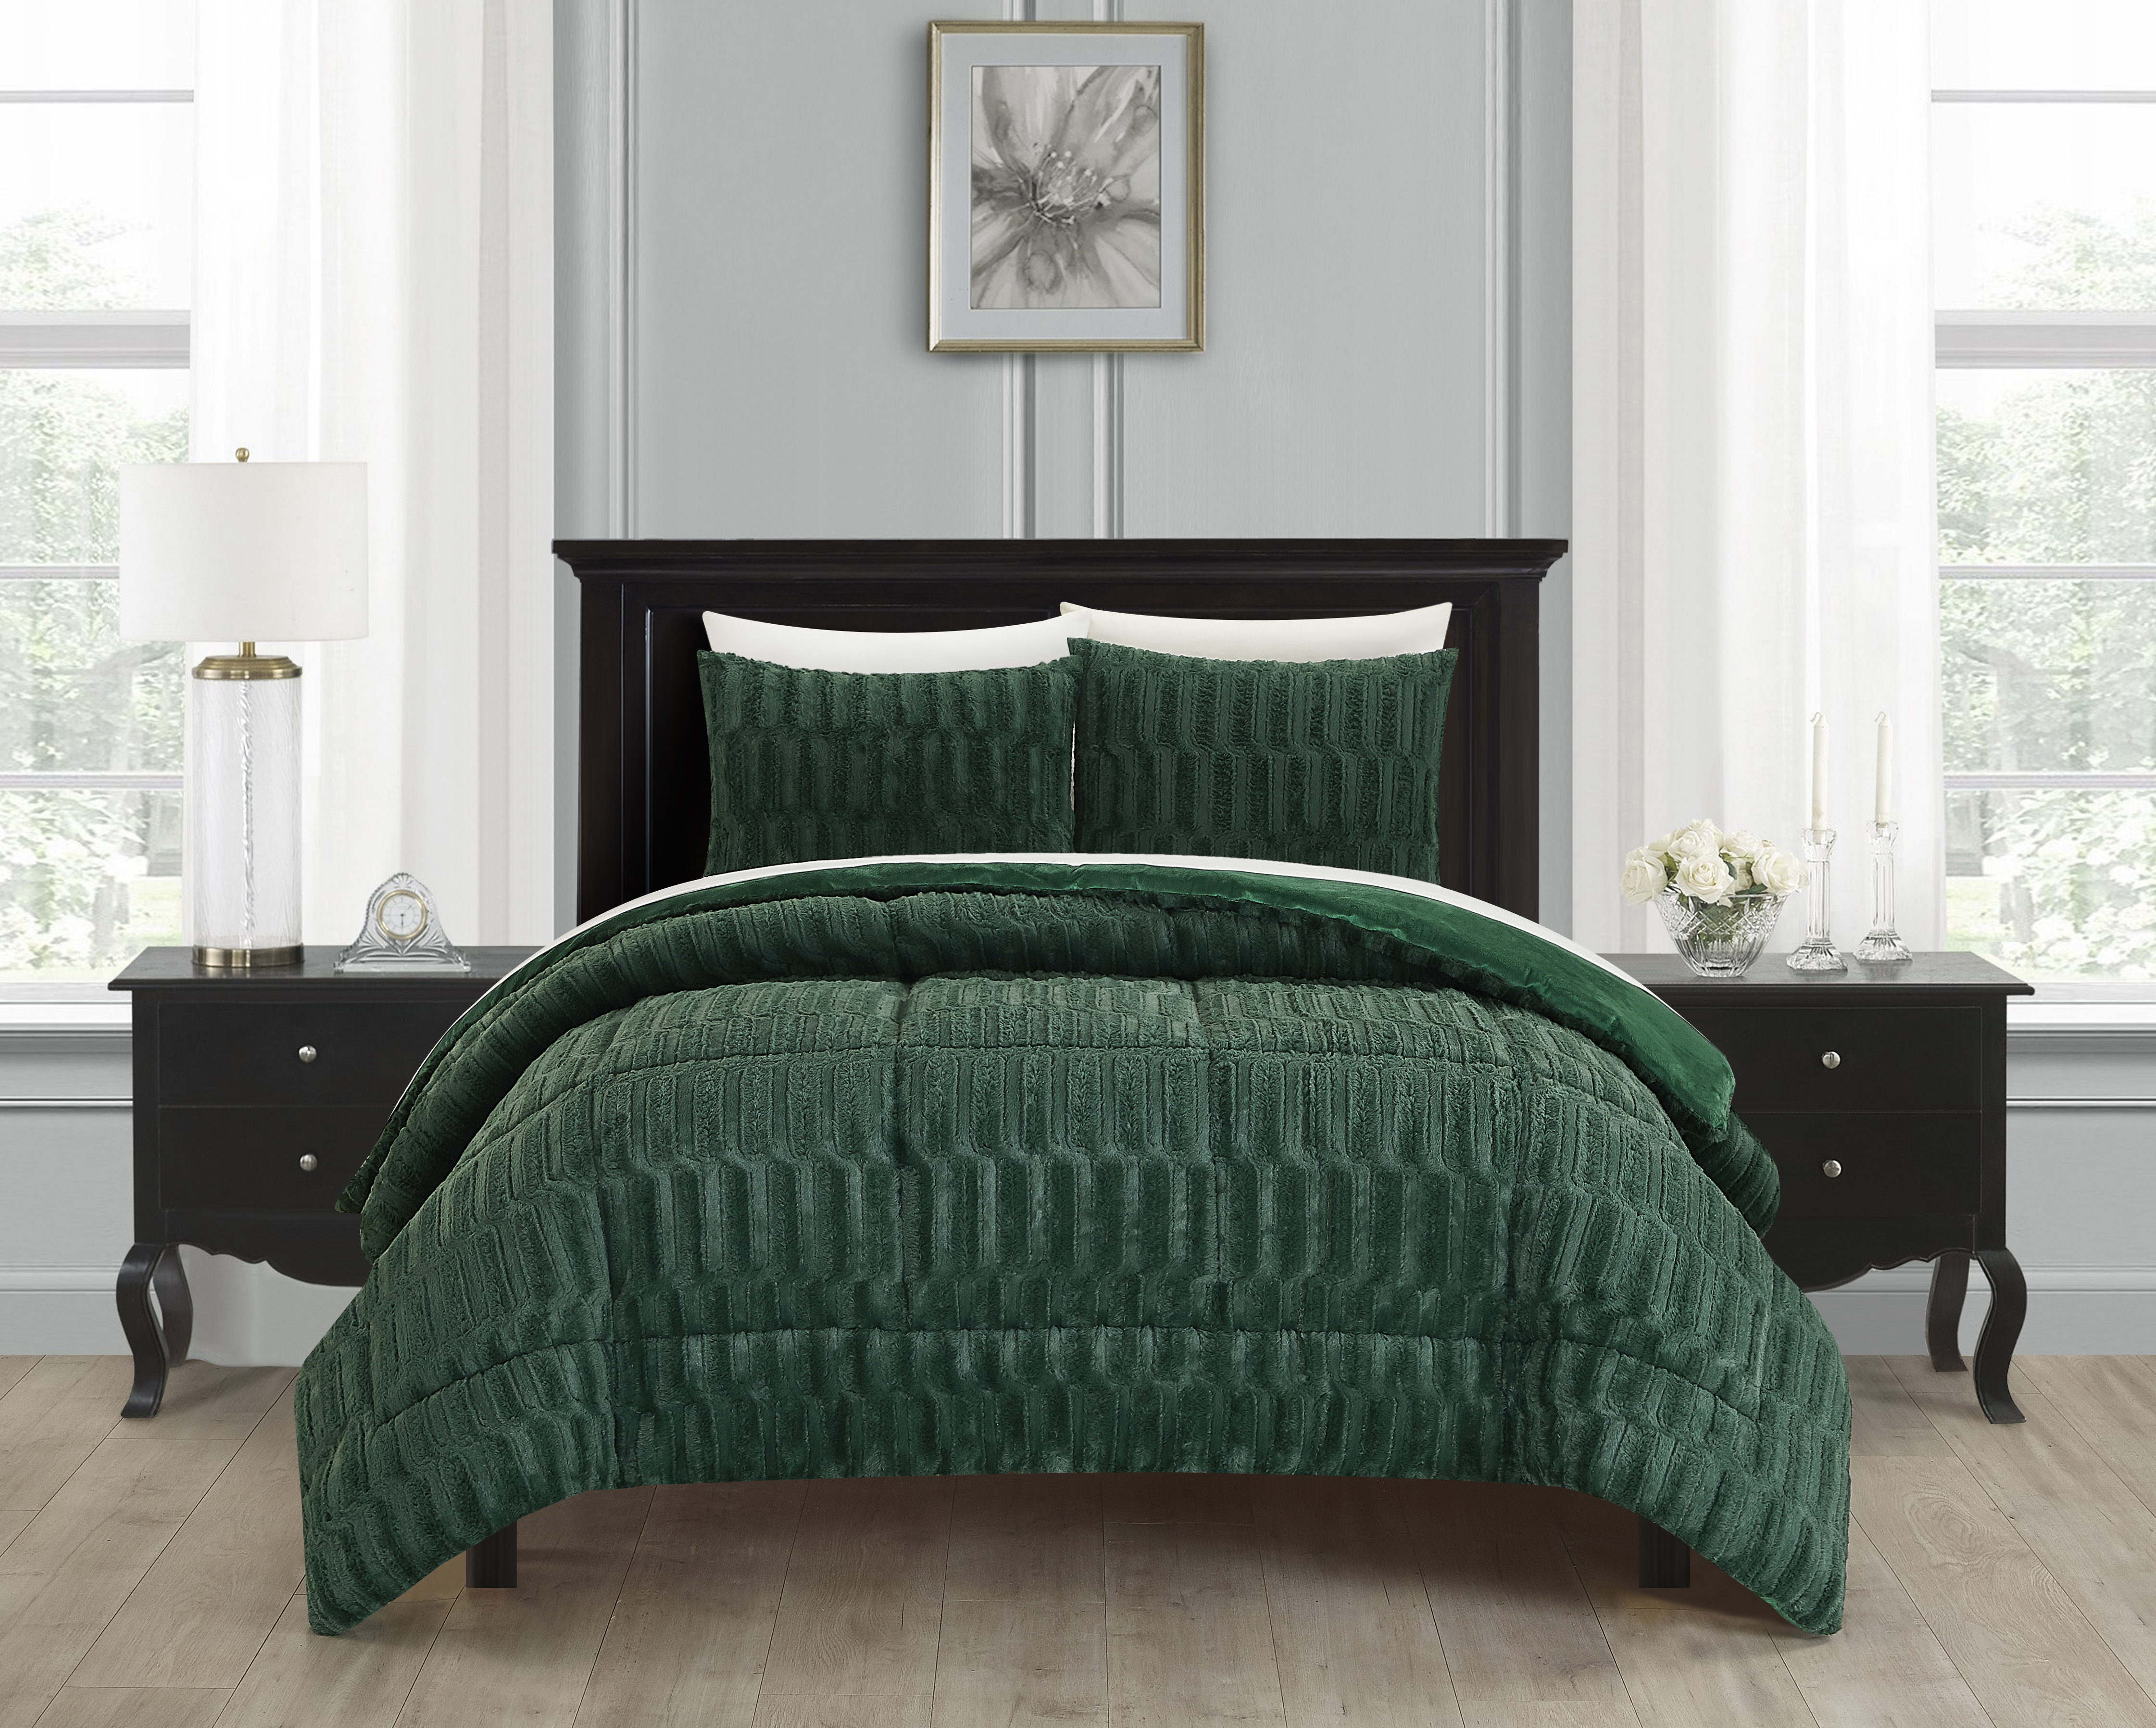 Farca 3 Or 2 Piece Comforter Textured Geometric Pattern Faux Micro-Mink Backing - Green, King - 3 Piece